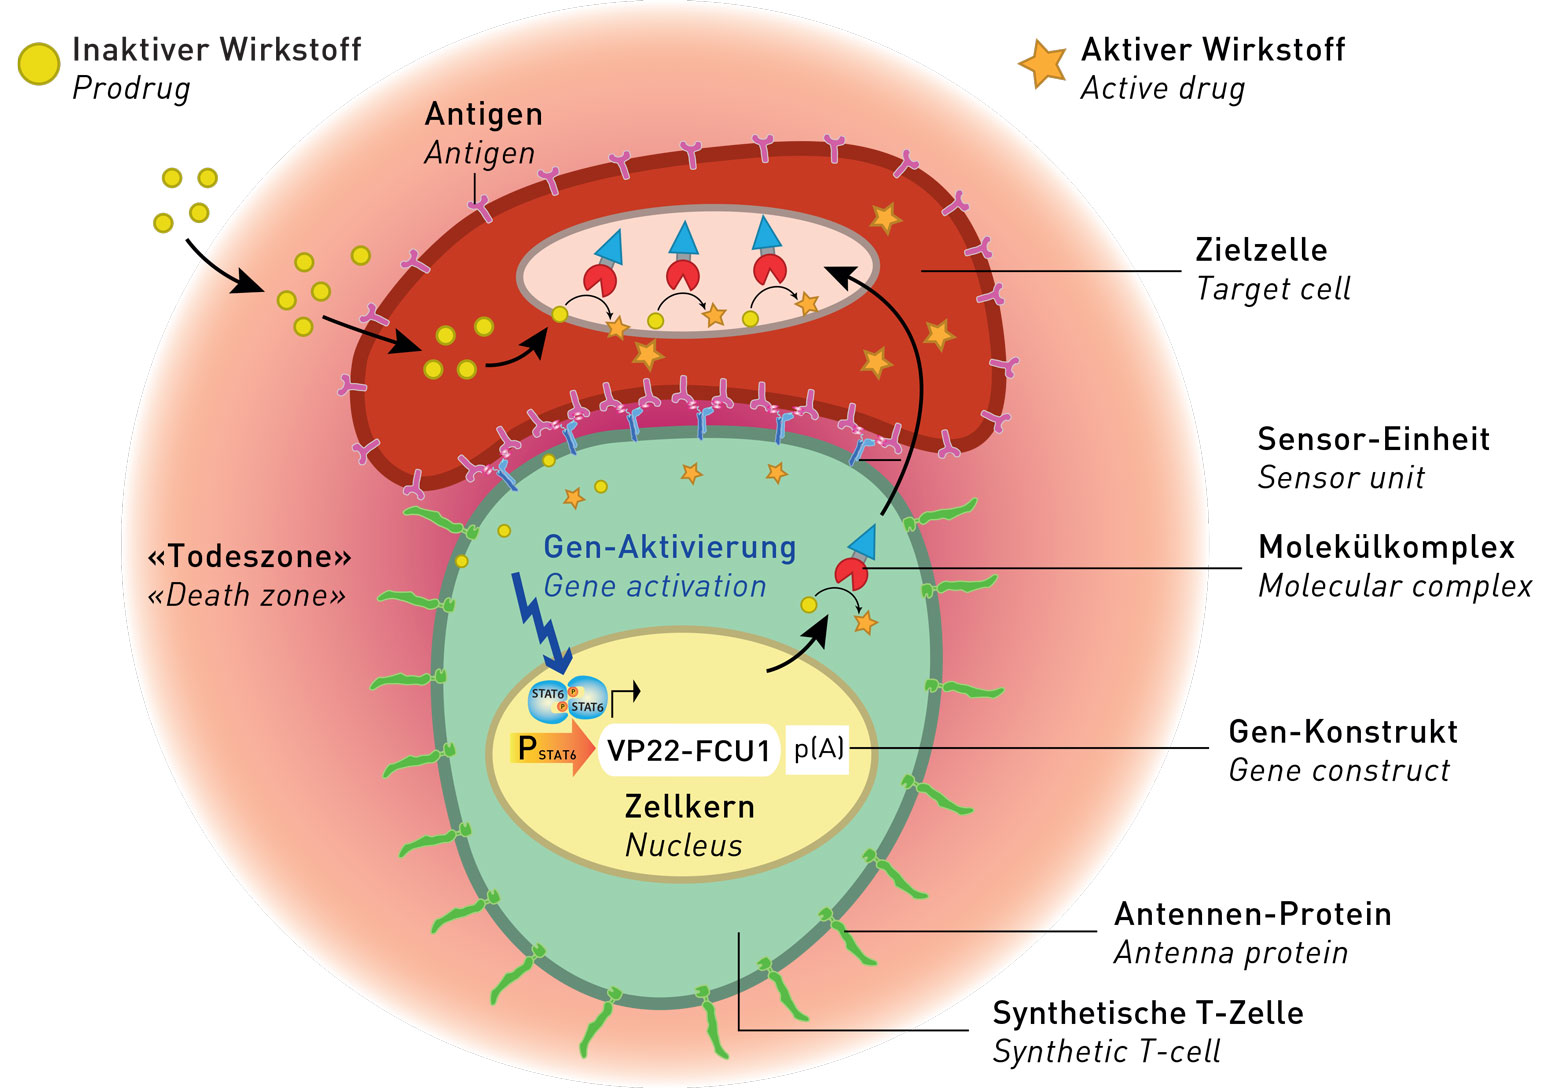 The artificial T-cell recognises a tumour cell and docks to it. In the process, antenna proteins bend, which triggers a chain reaction. This leads to the killing of the tumor cell. (Graphic: ETH Zurich)